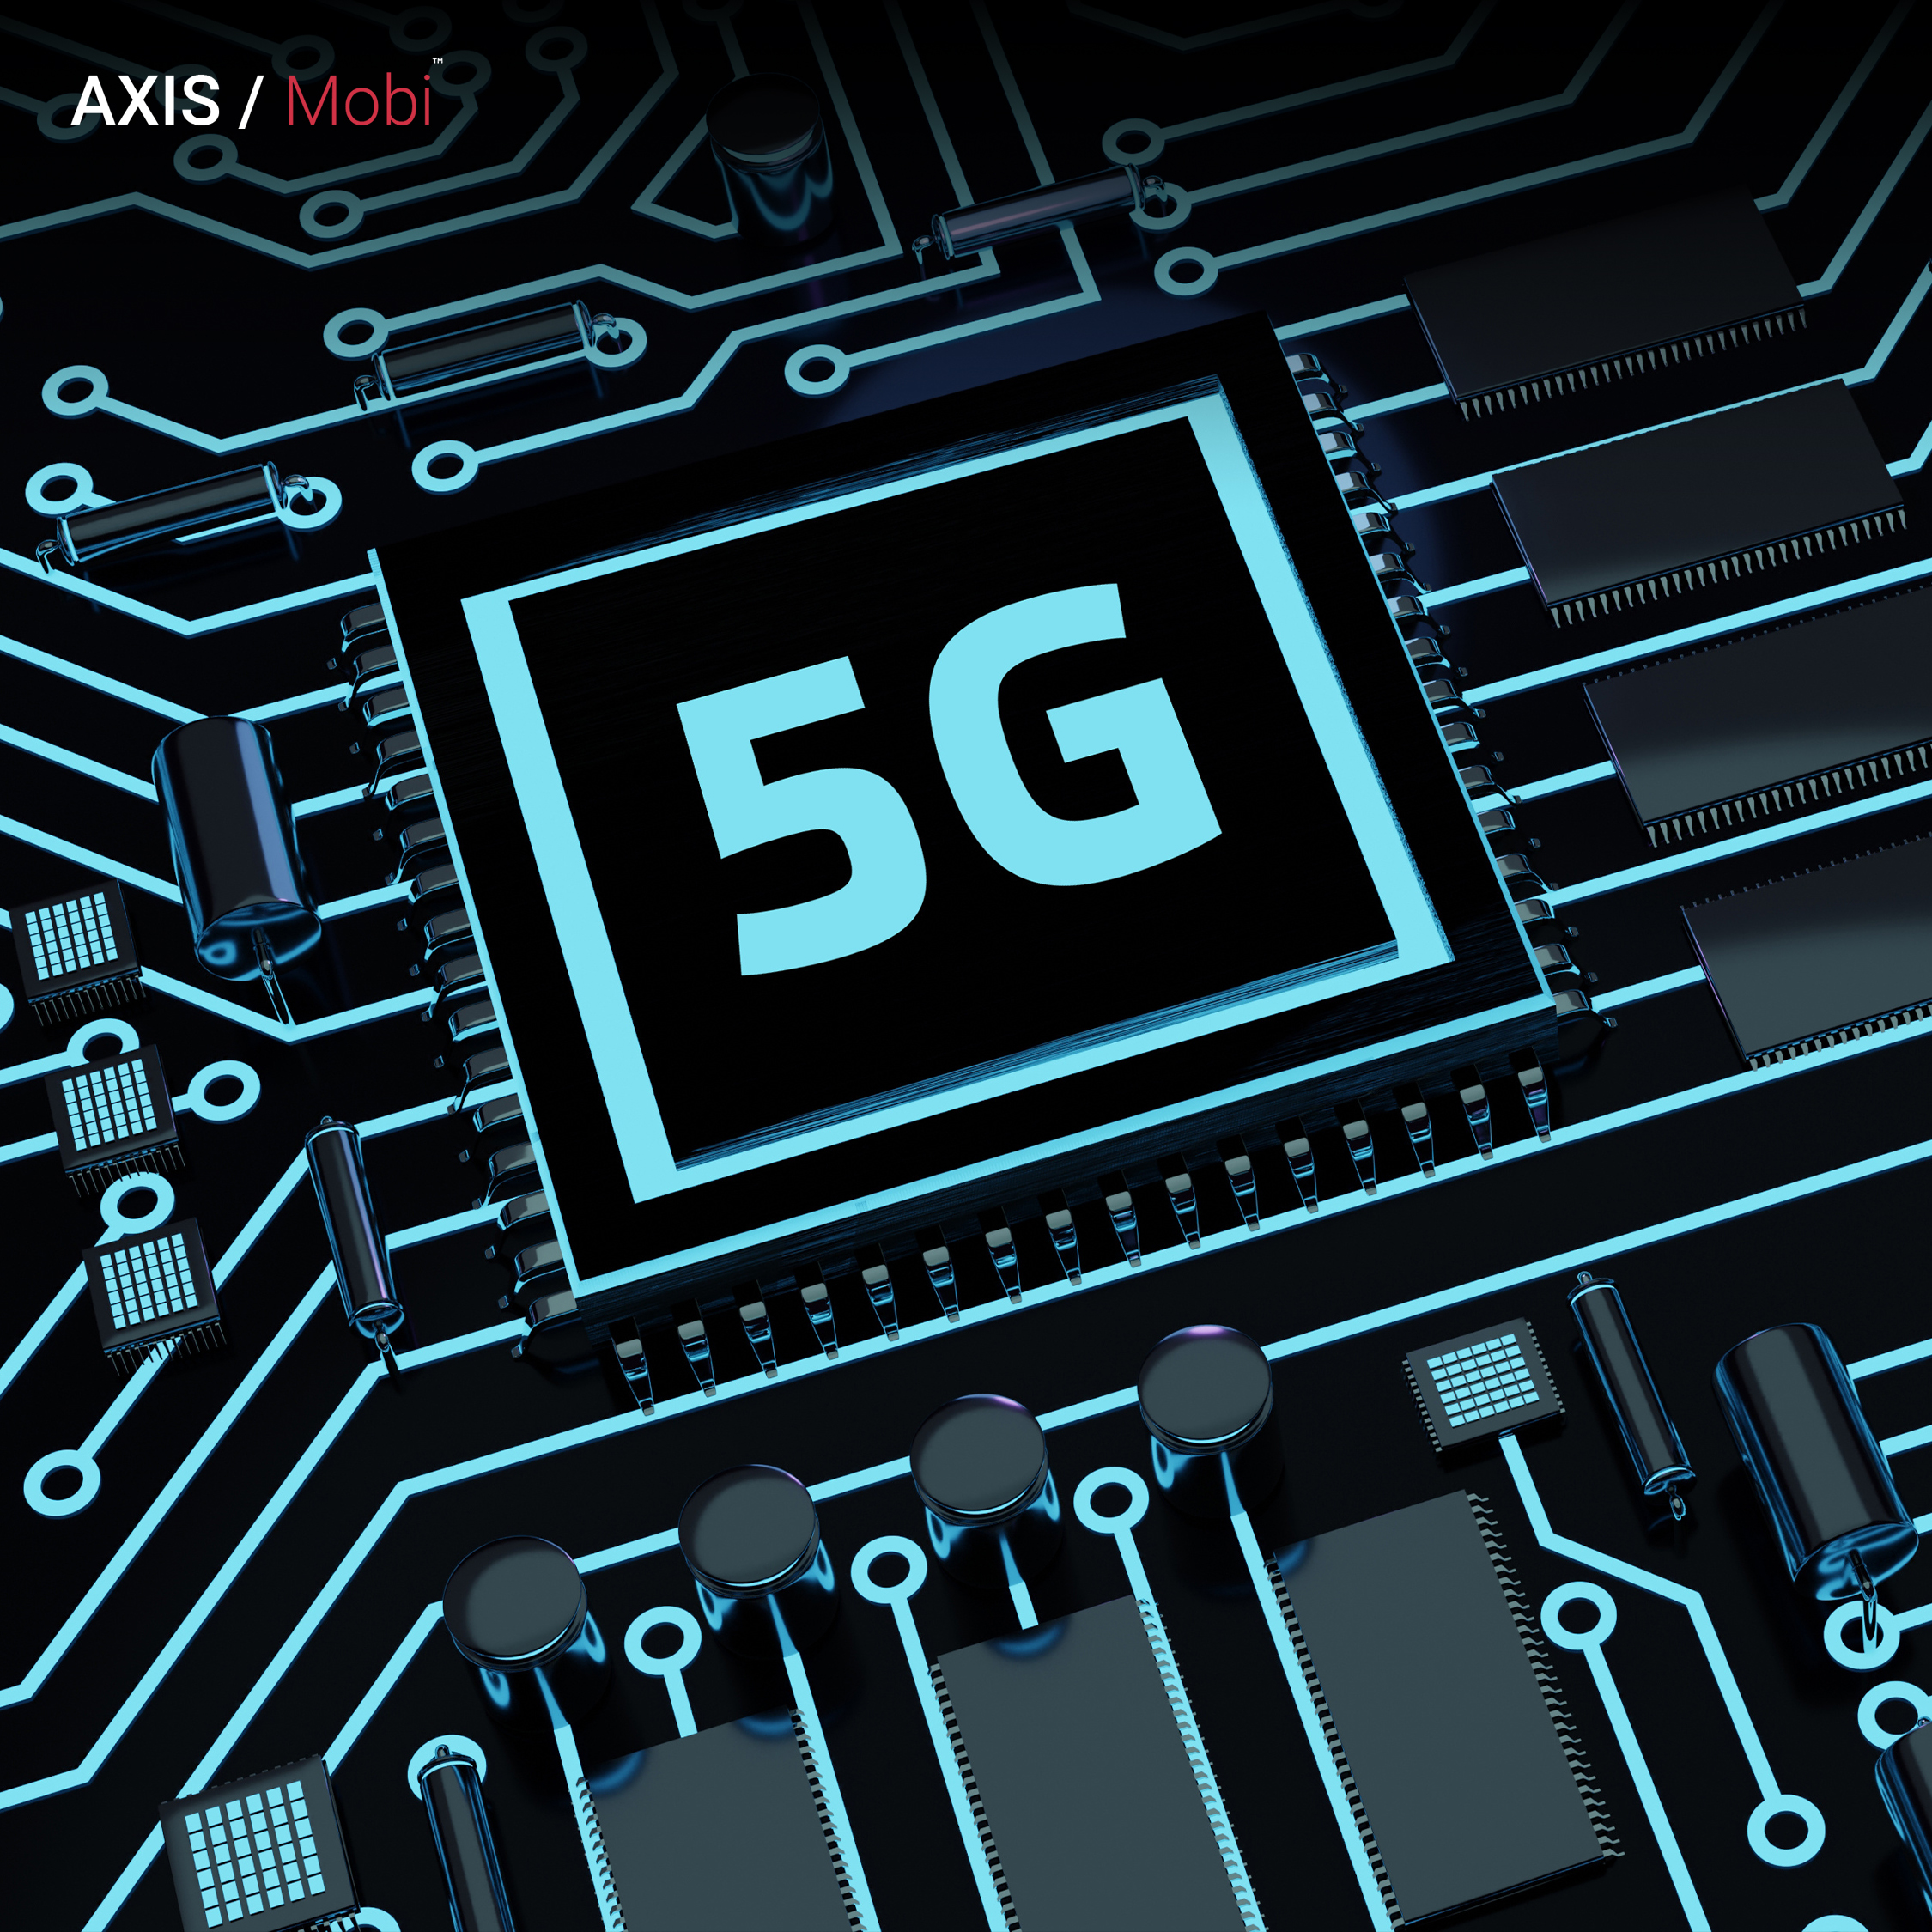 conclusion - is 5G technology risky?